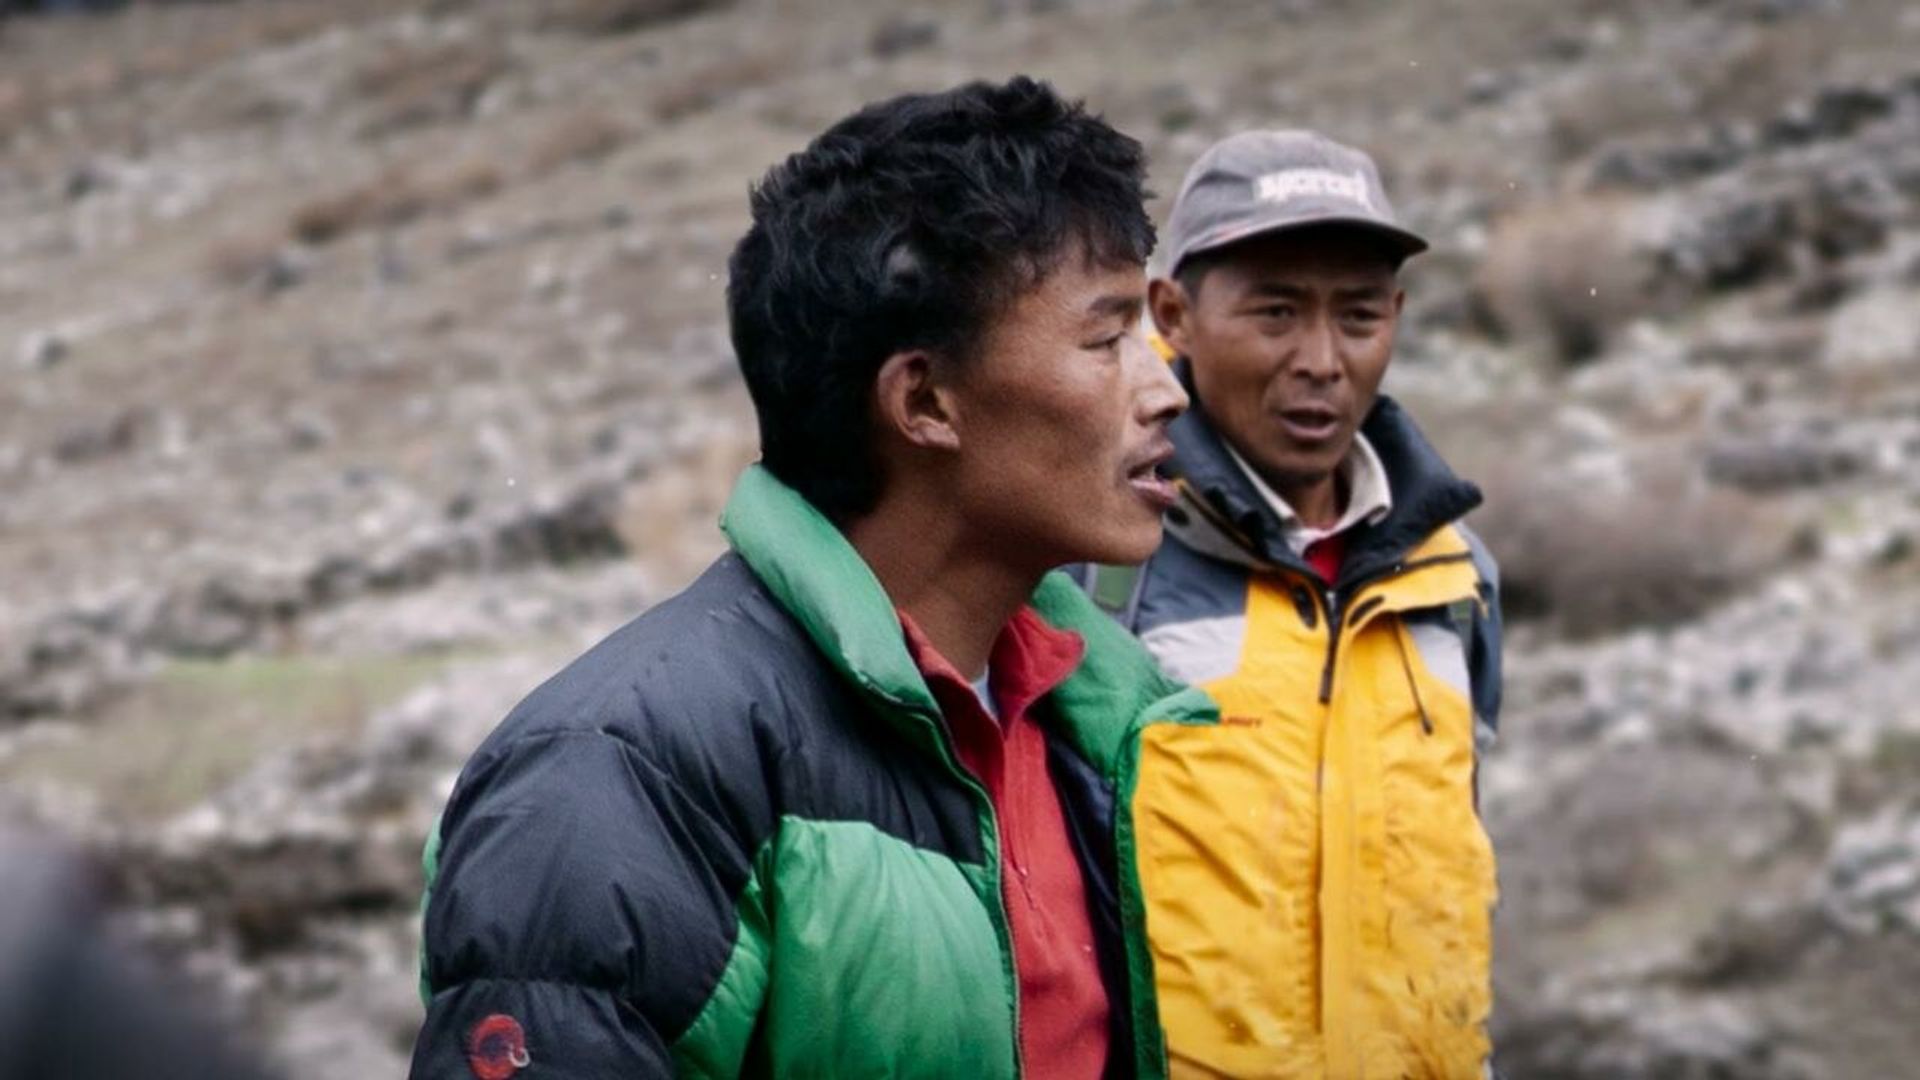 Aftershock: Everest and the Nepal Earthquake background